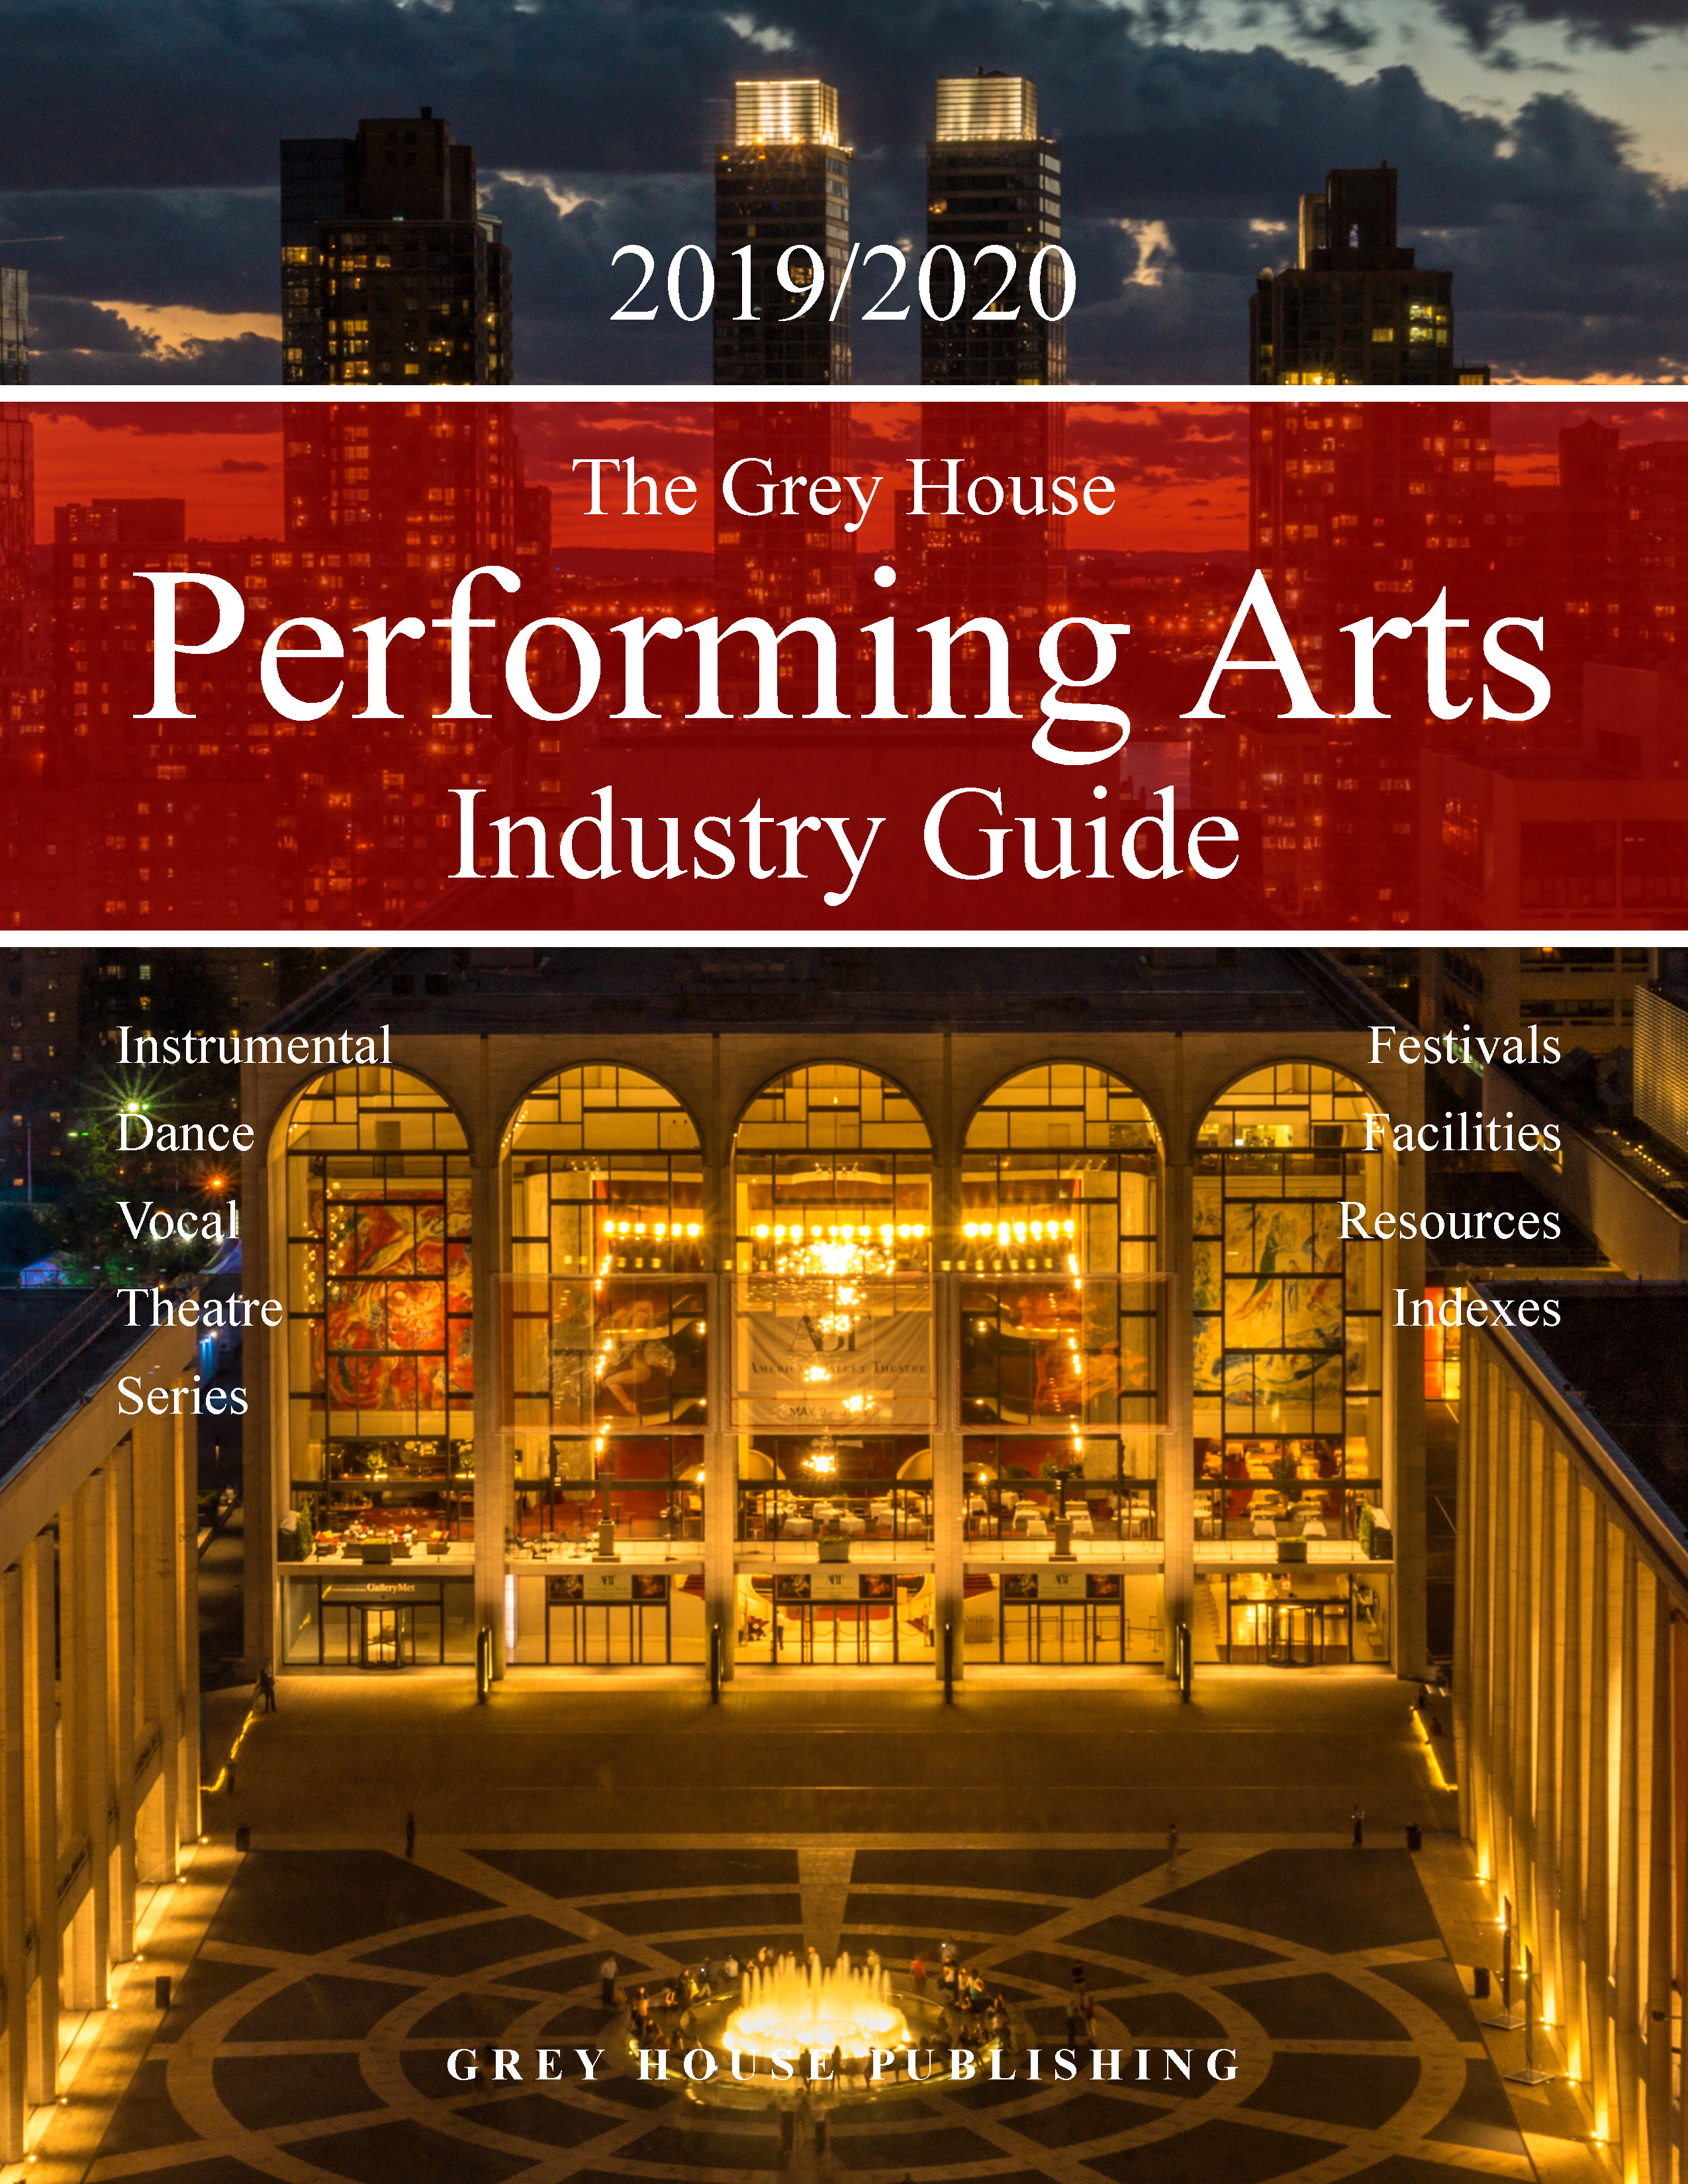 The Grey House Performing Arts Industry Guide